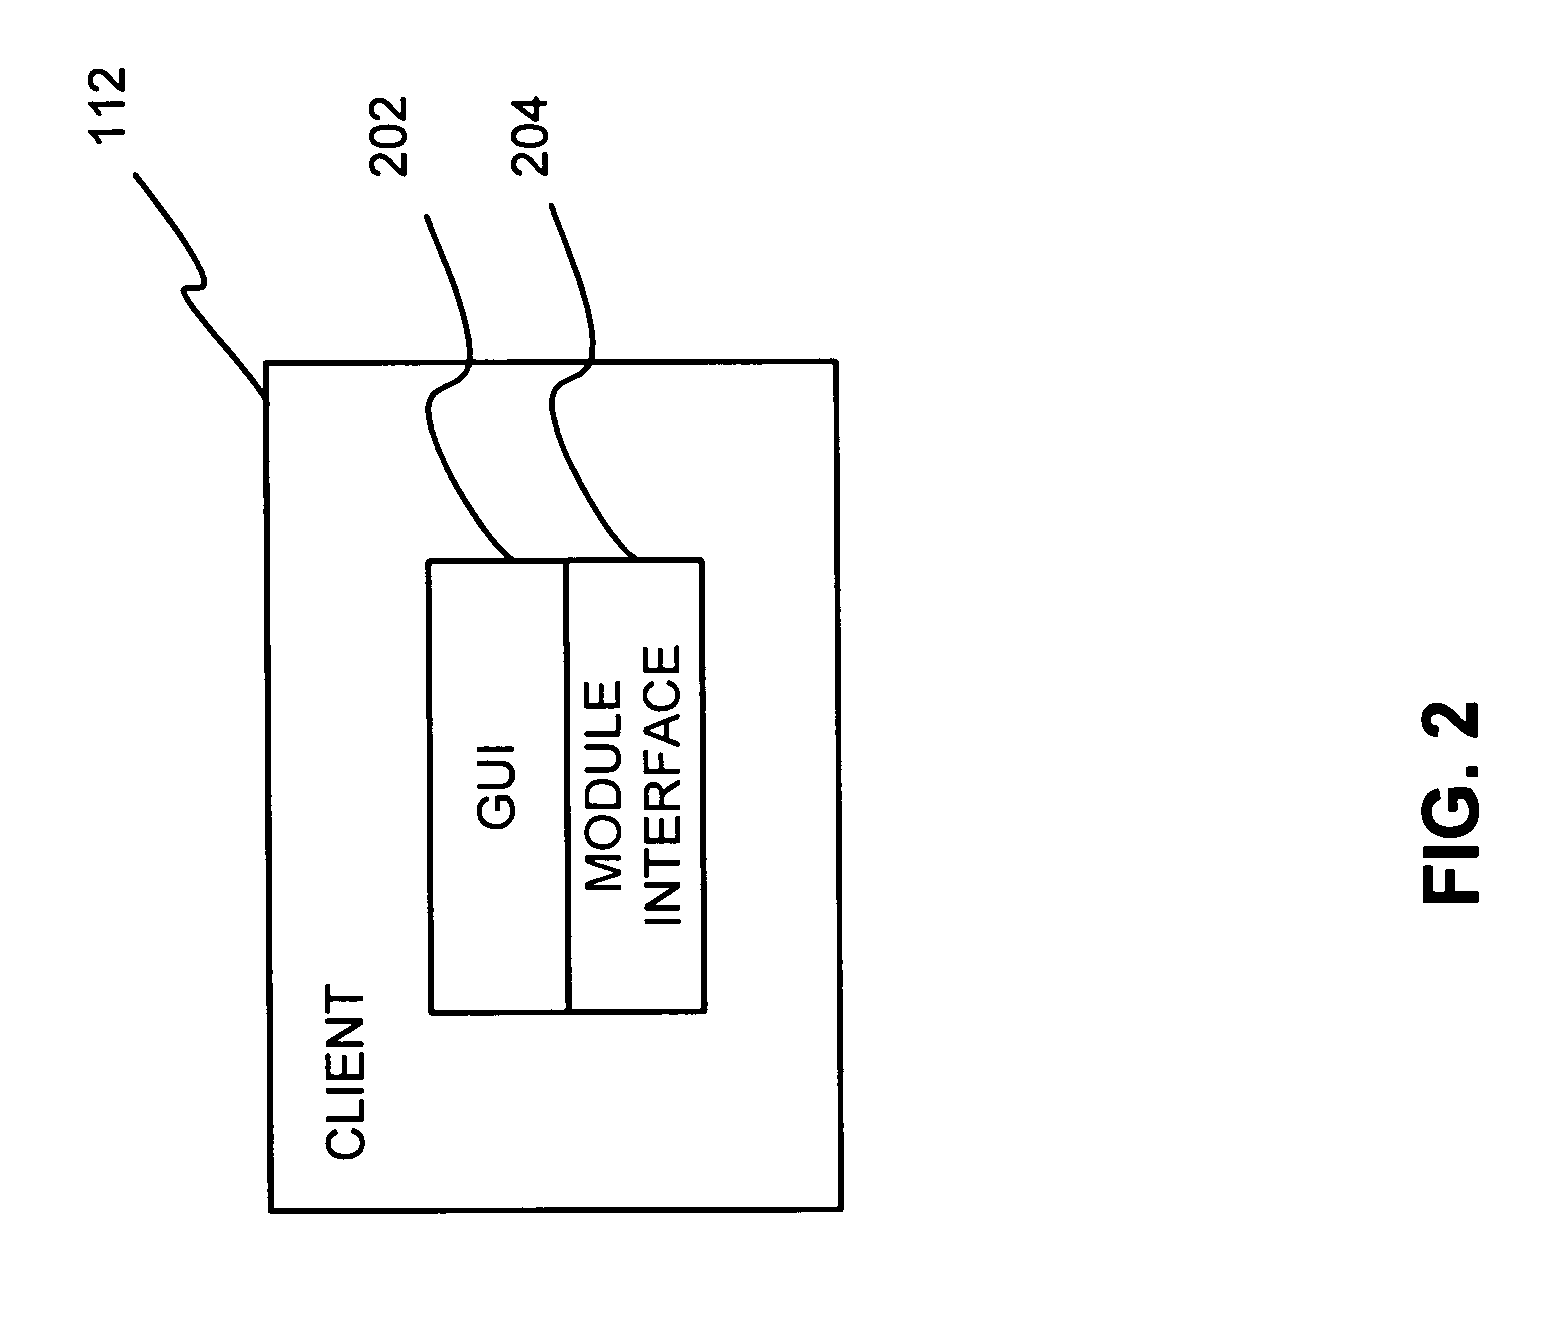 System and method for efficient computation of simulated thermodynamic property and phase equilibrium characteristics using comprehensive local property models